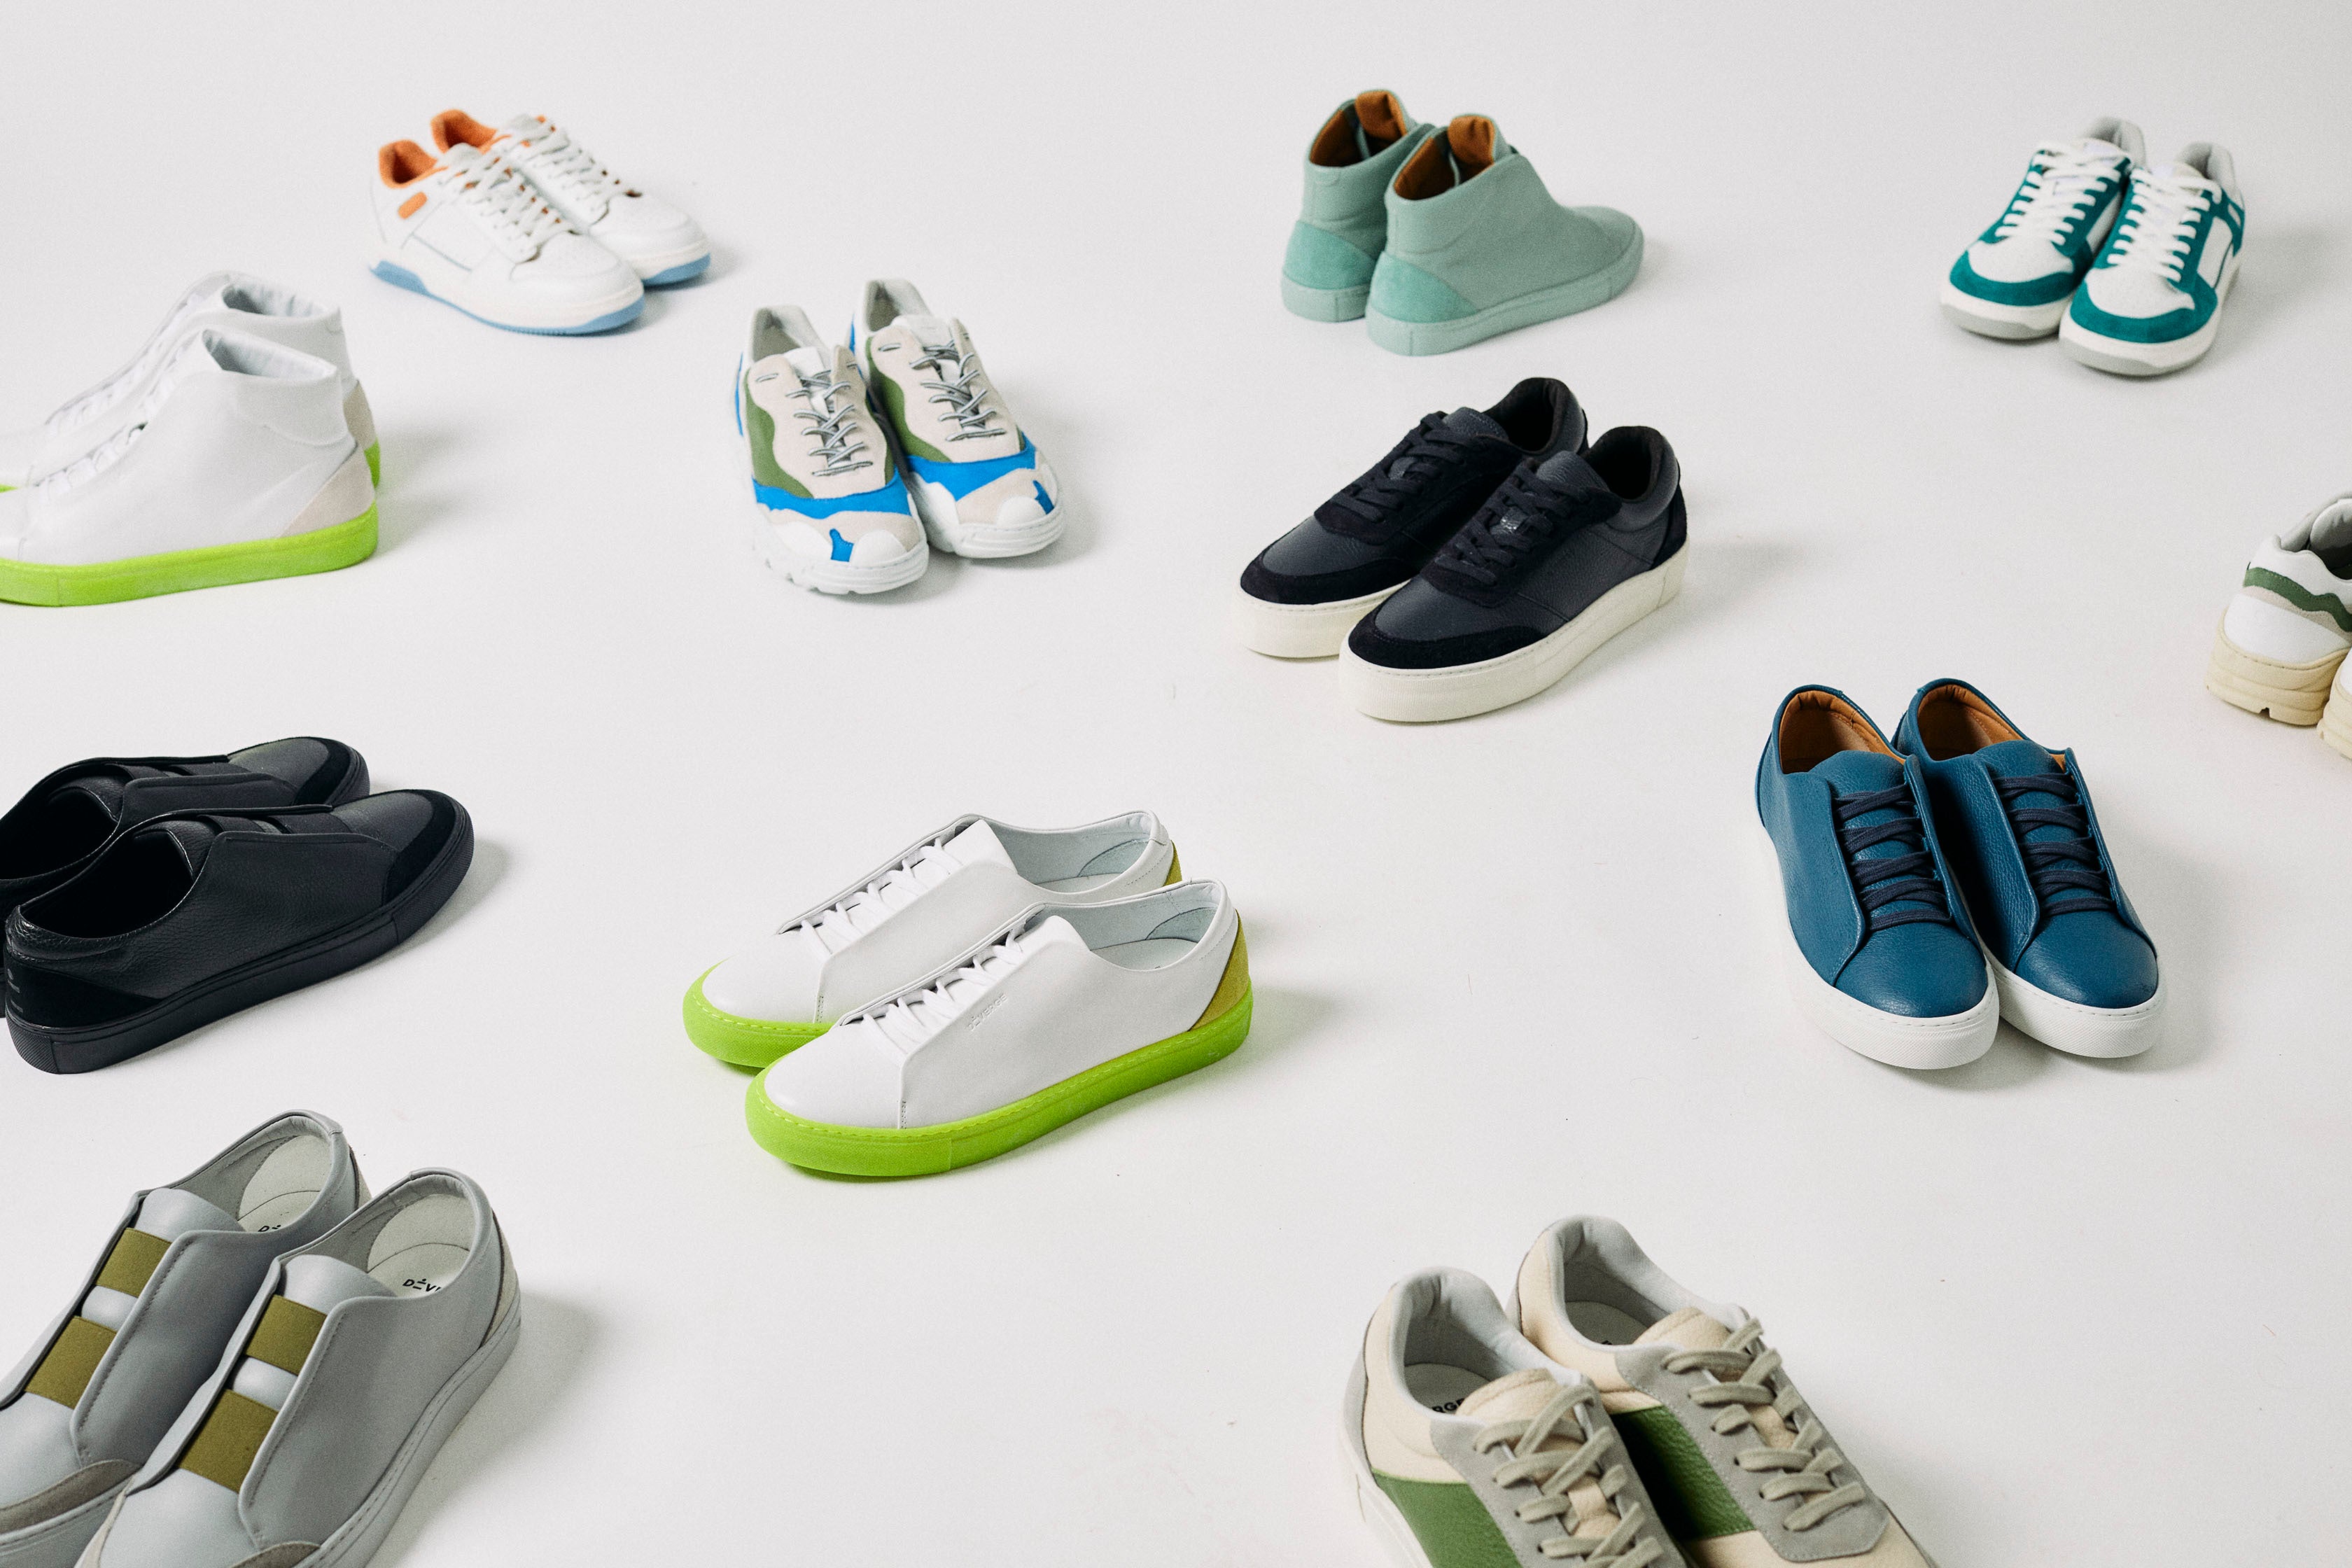 Sneaker Customisation: Why customizing helps the environment